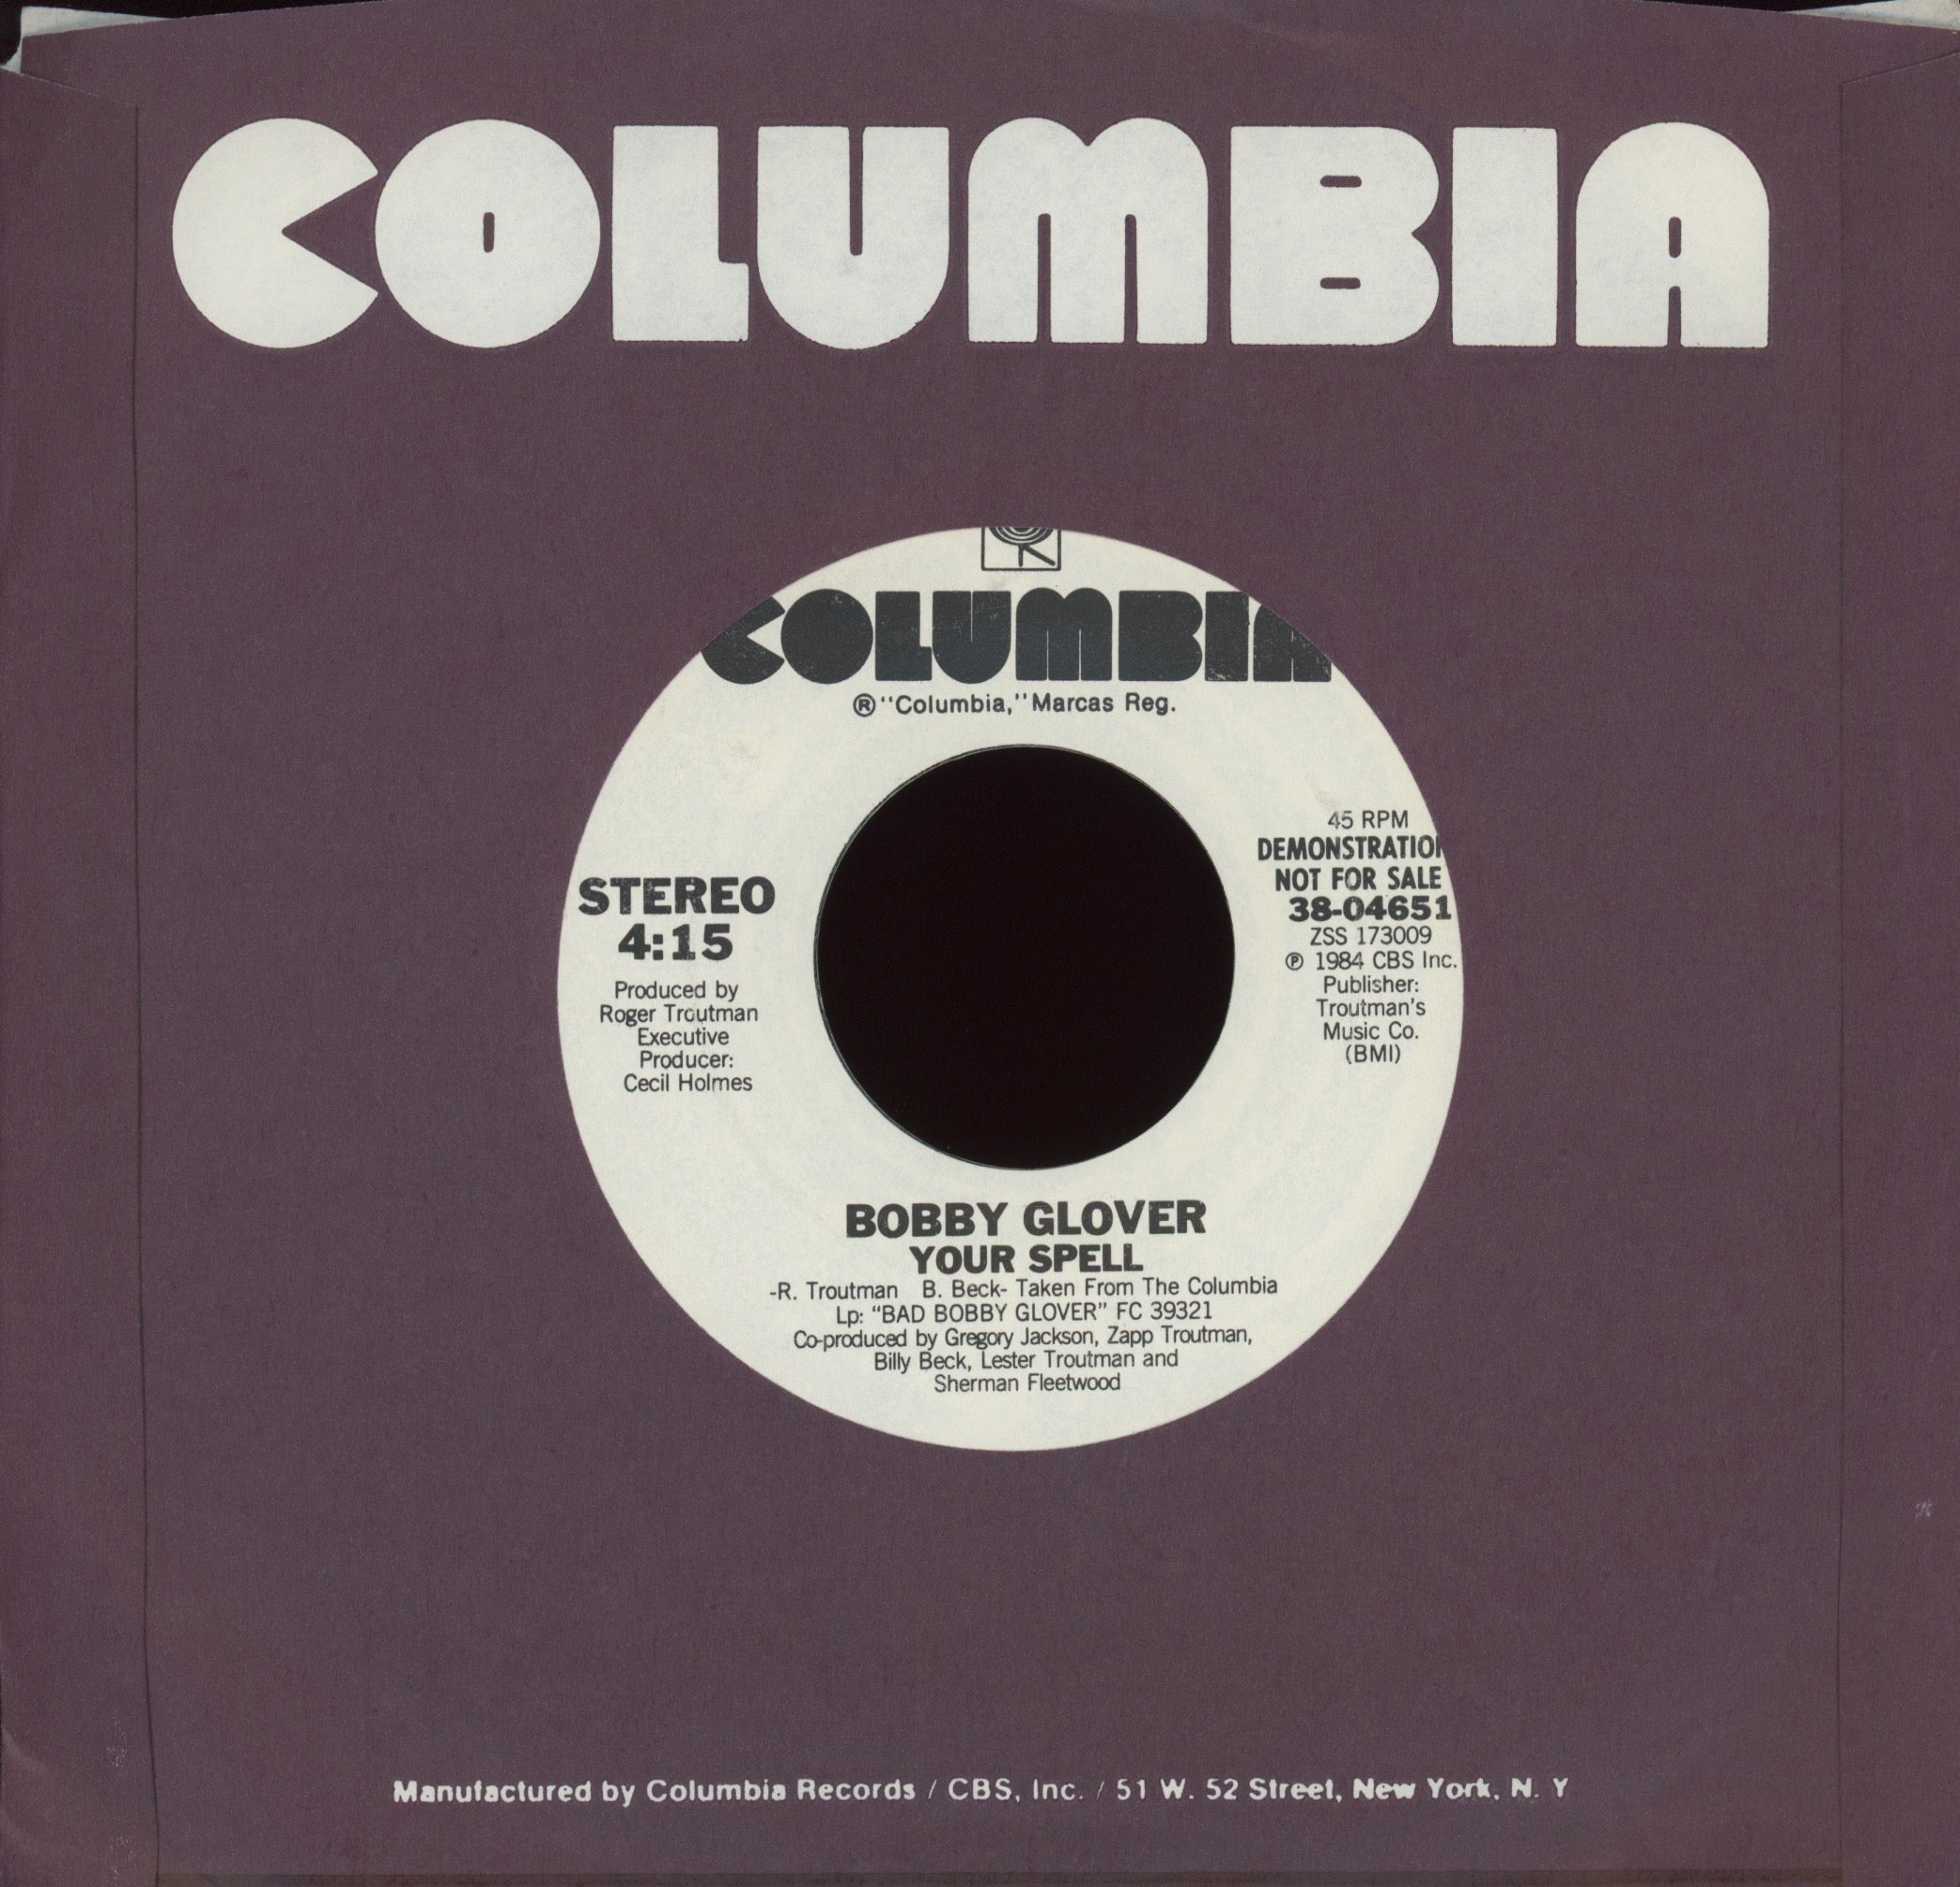 Bobby Glover - Your Spell on Columbia Promo